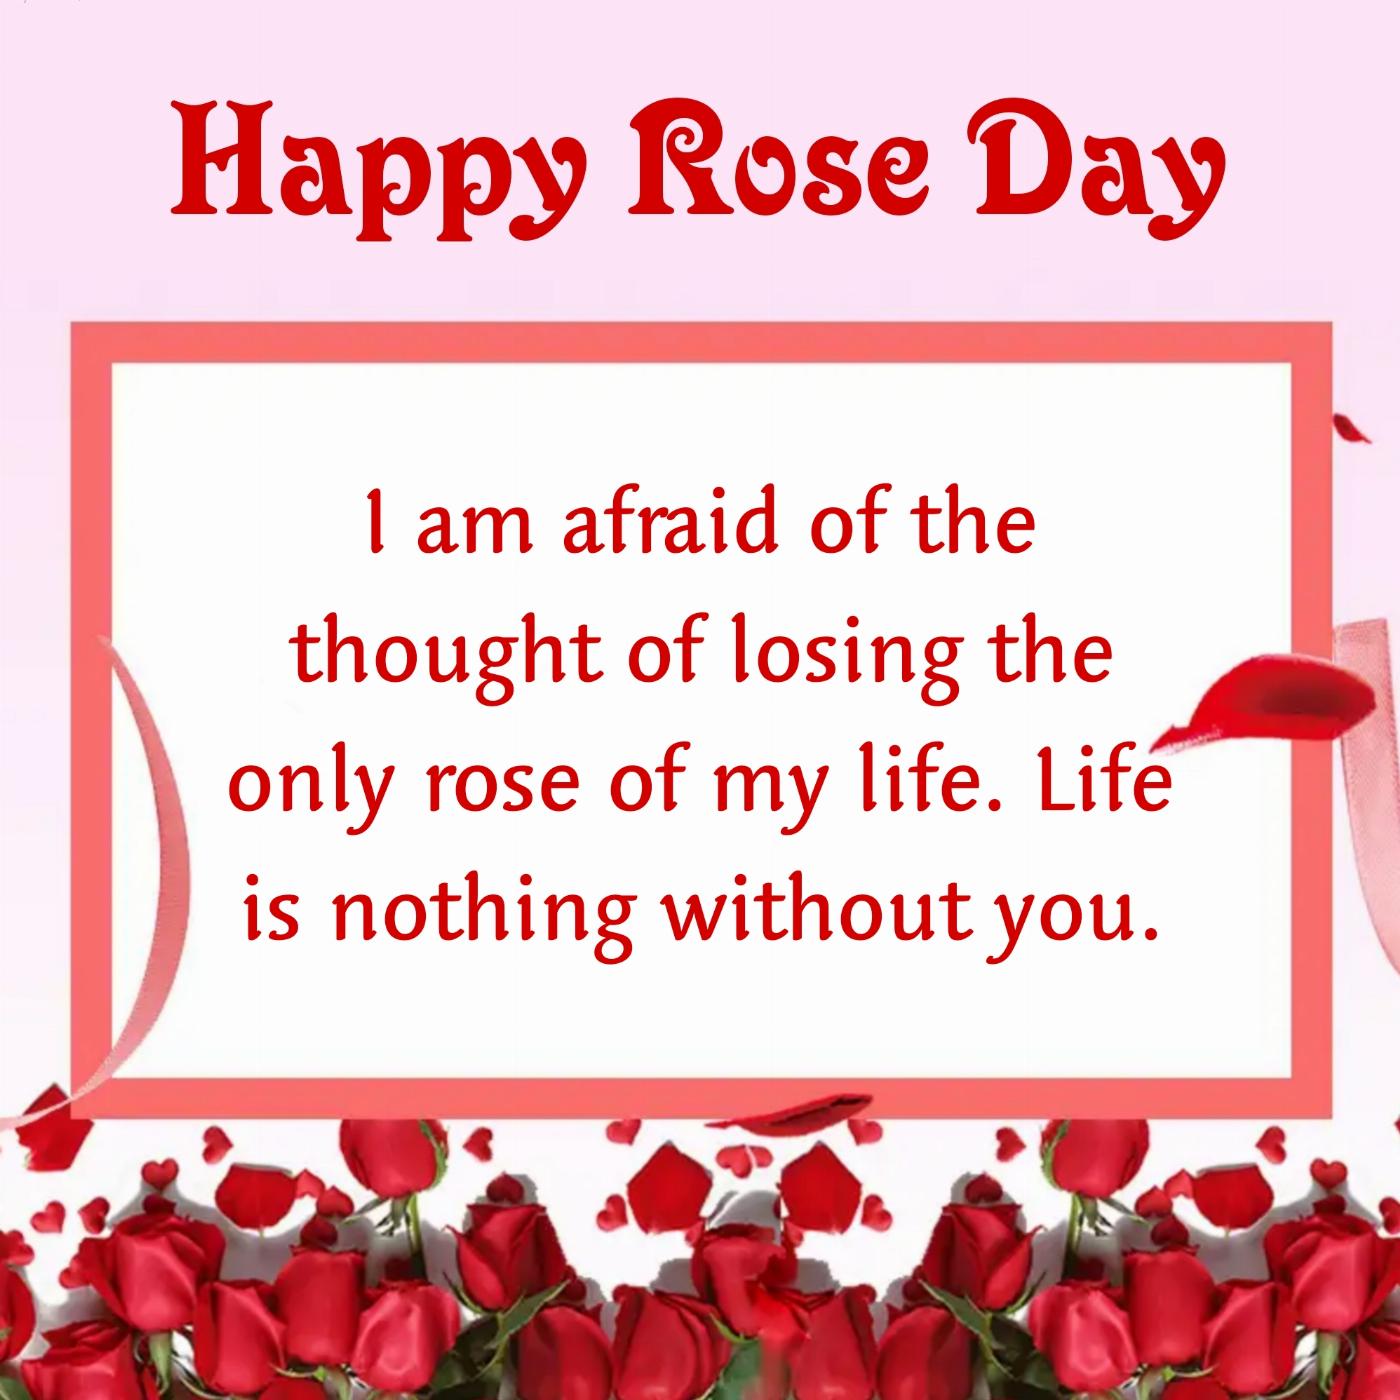 I am afraid of the thought of losing the only rose of my life